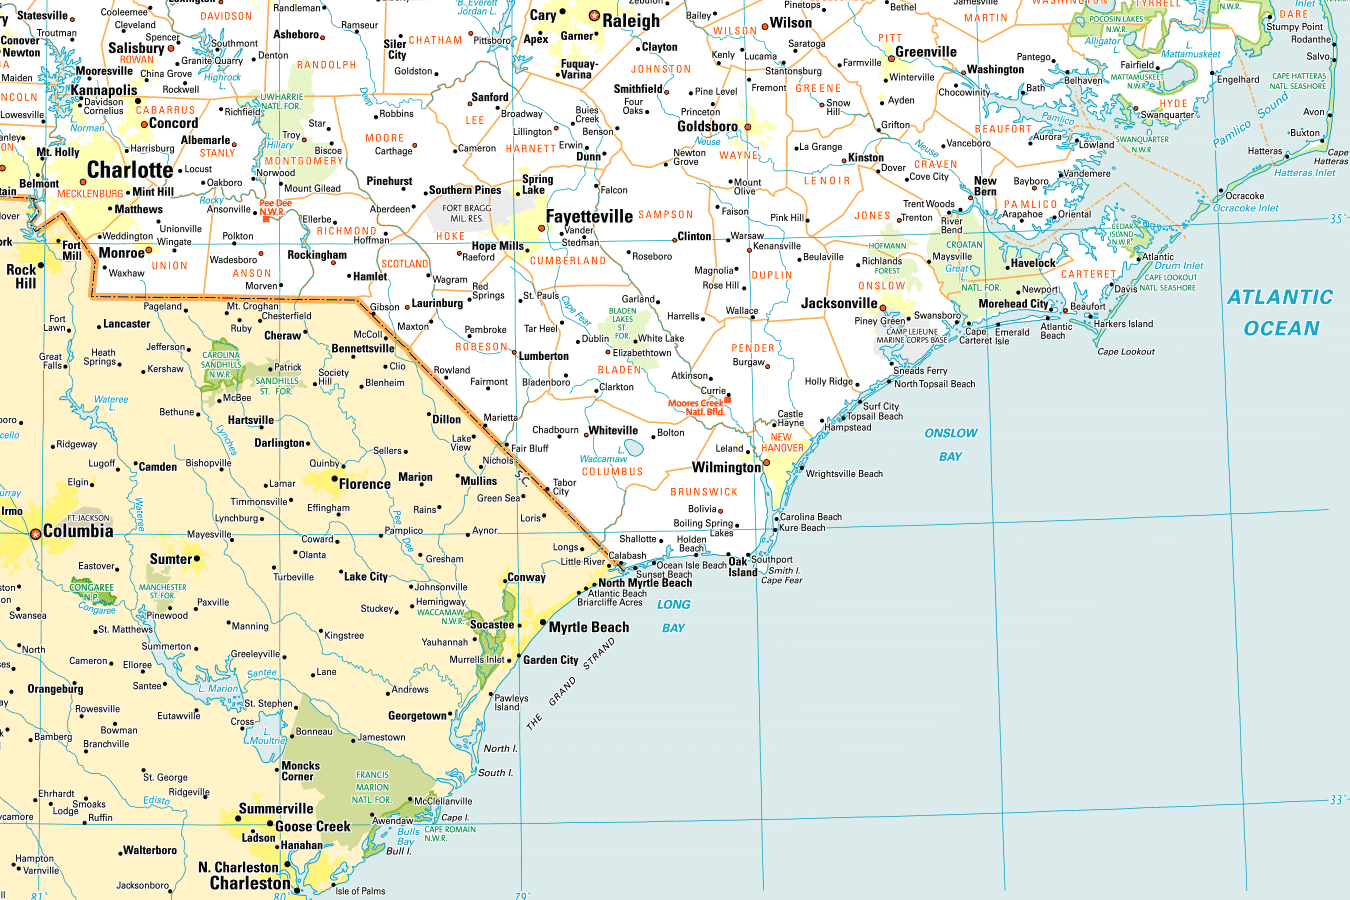 Wilmington, NC is situated on the east coast of North Carolina an hour north of Myrtle Beach, South Carolina.